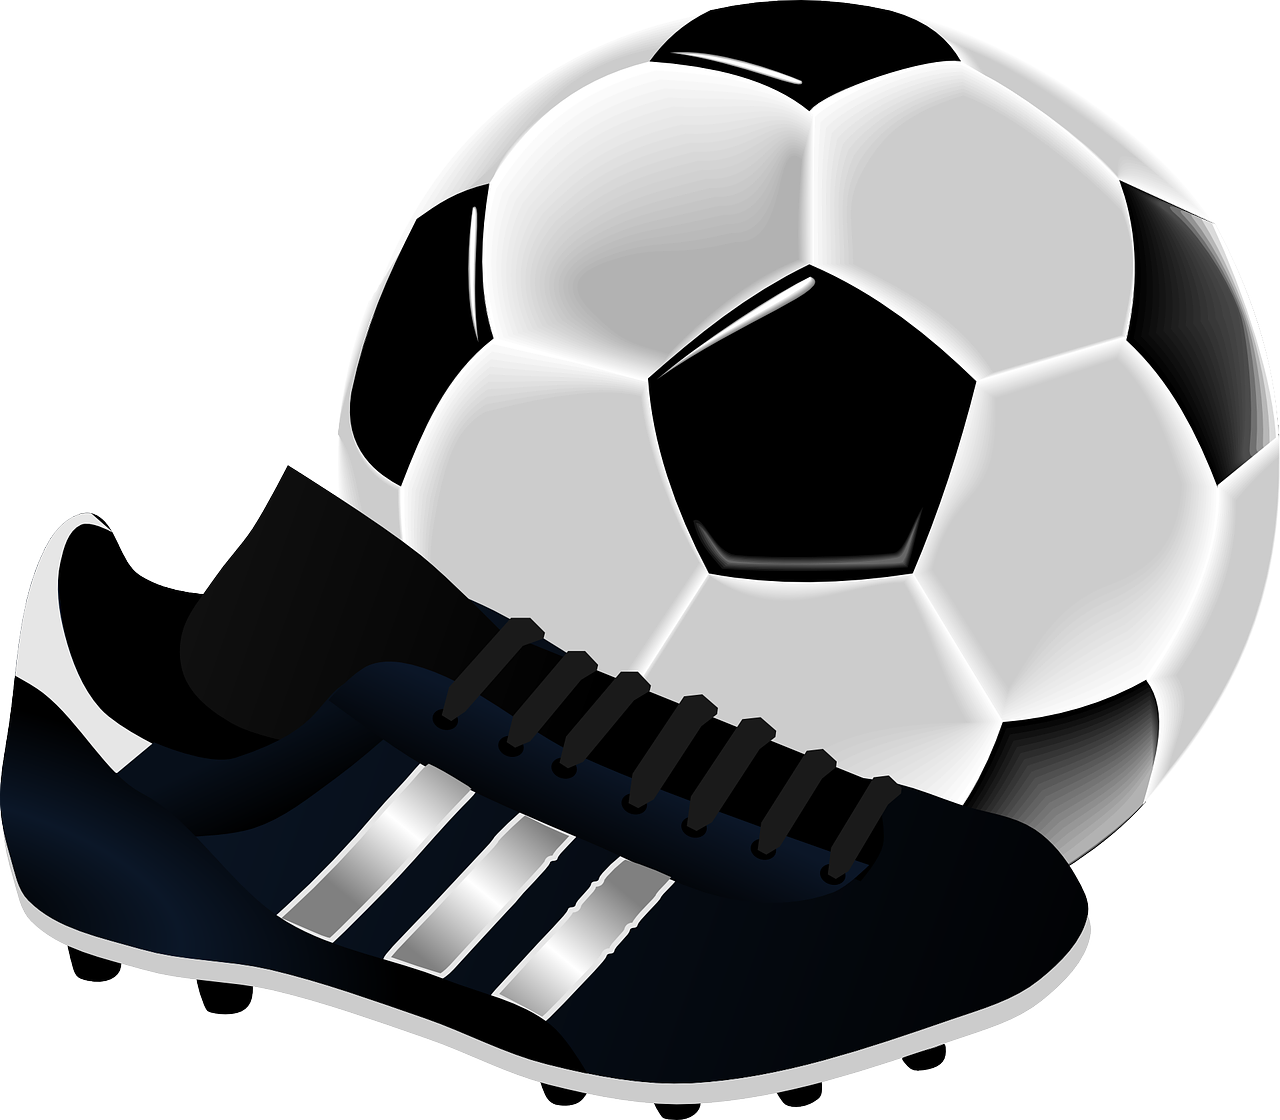 A shoe in front of a football